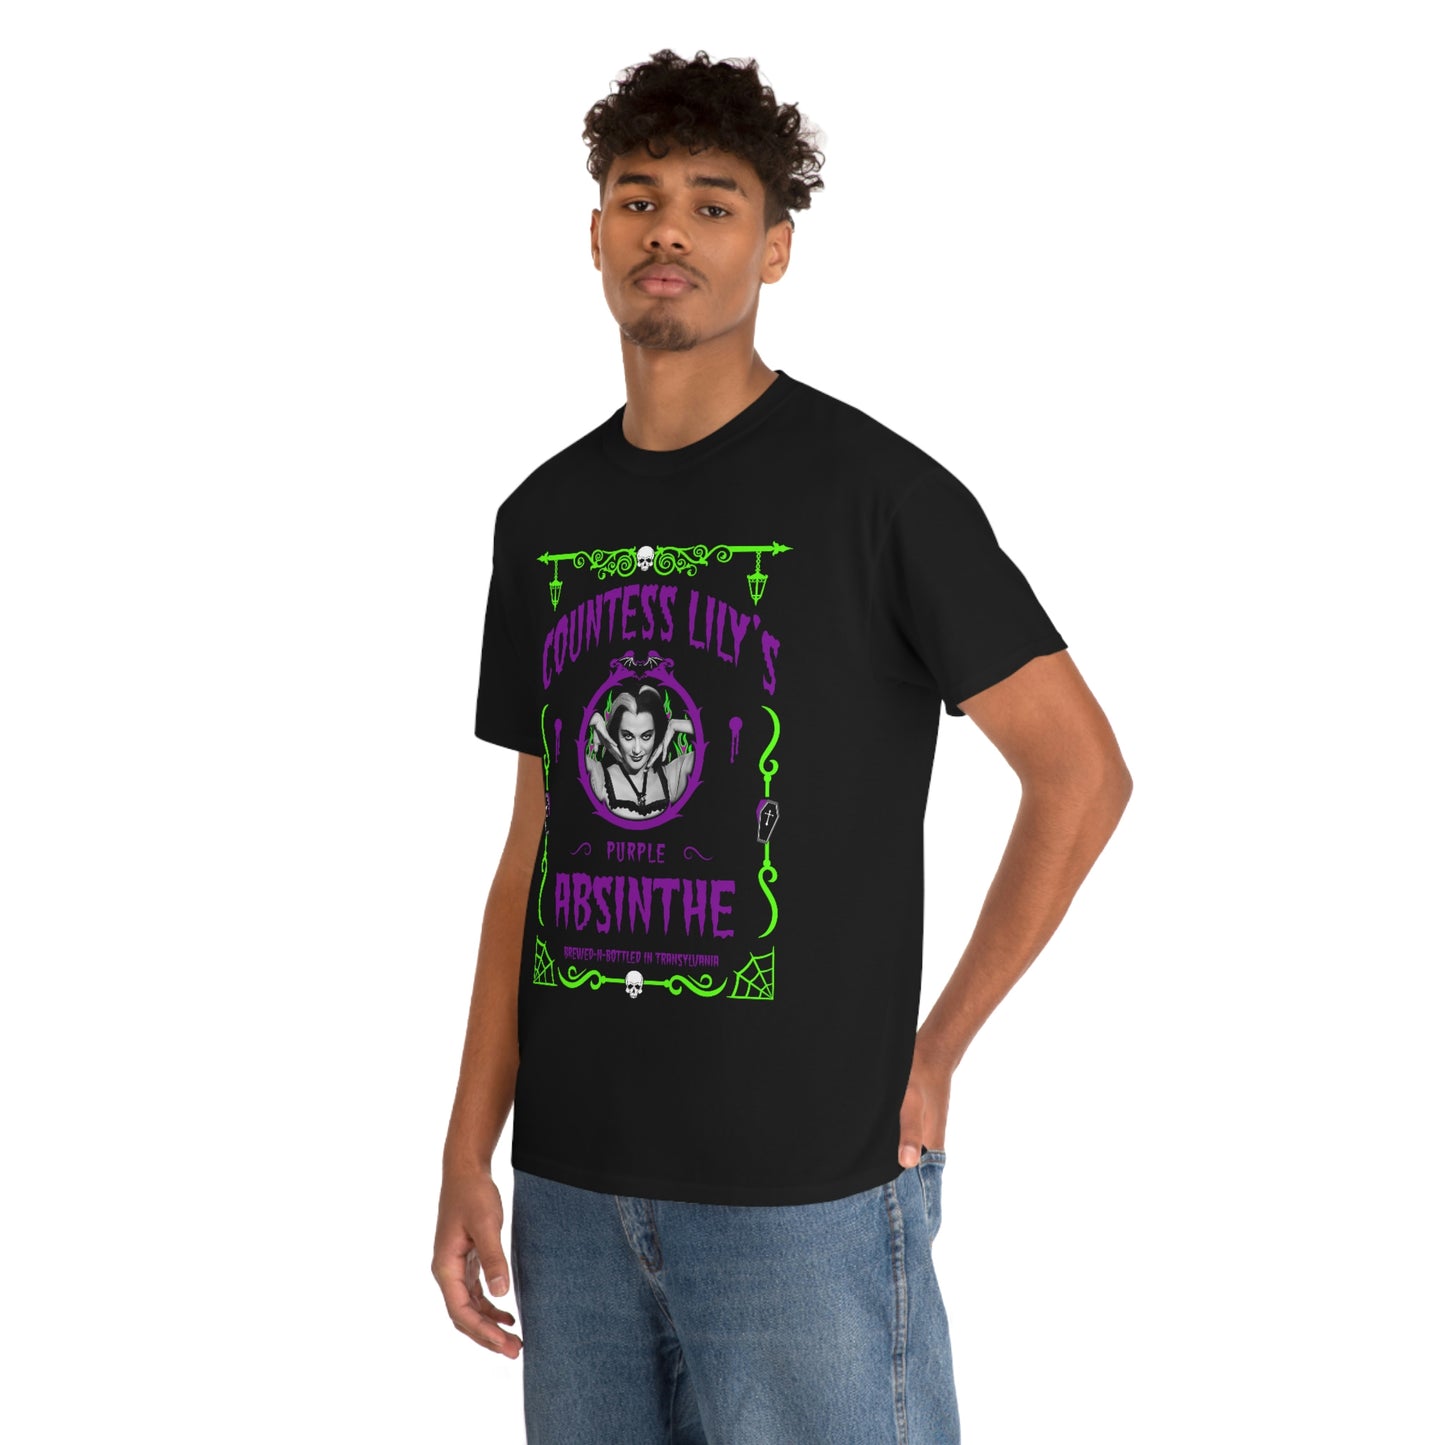 ABSINTHE MONSTERS 3 (COUNTESS LILY) Unisex Heavy Cotton Tee